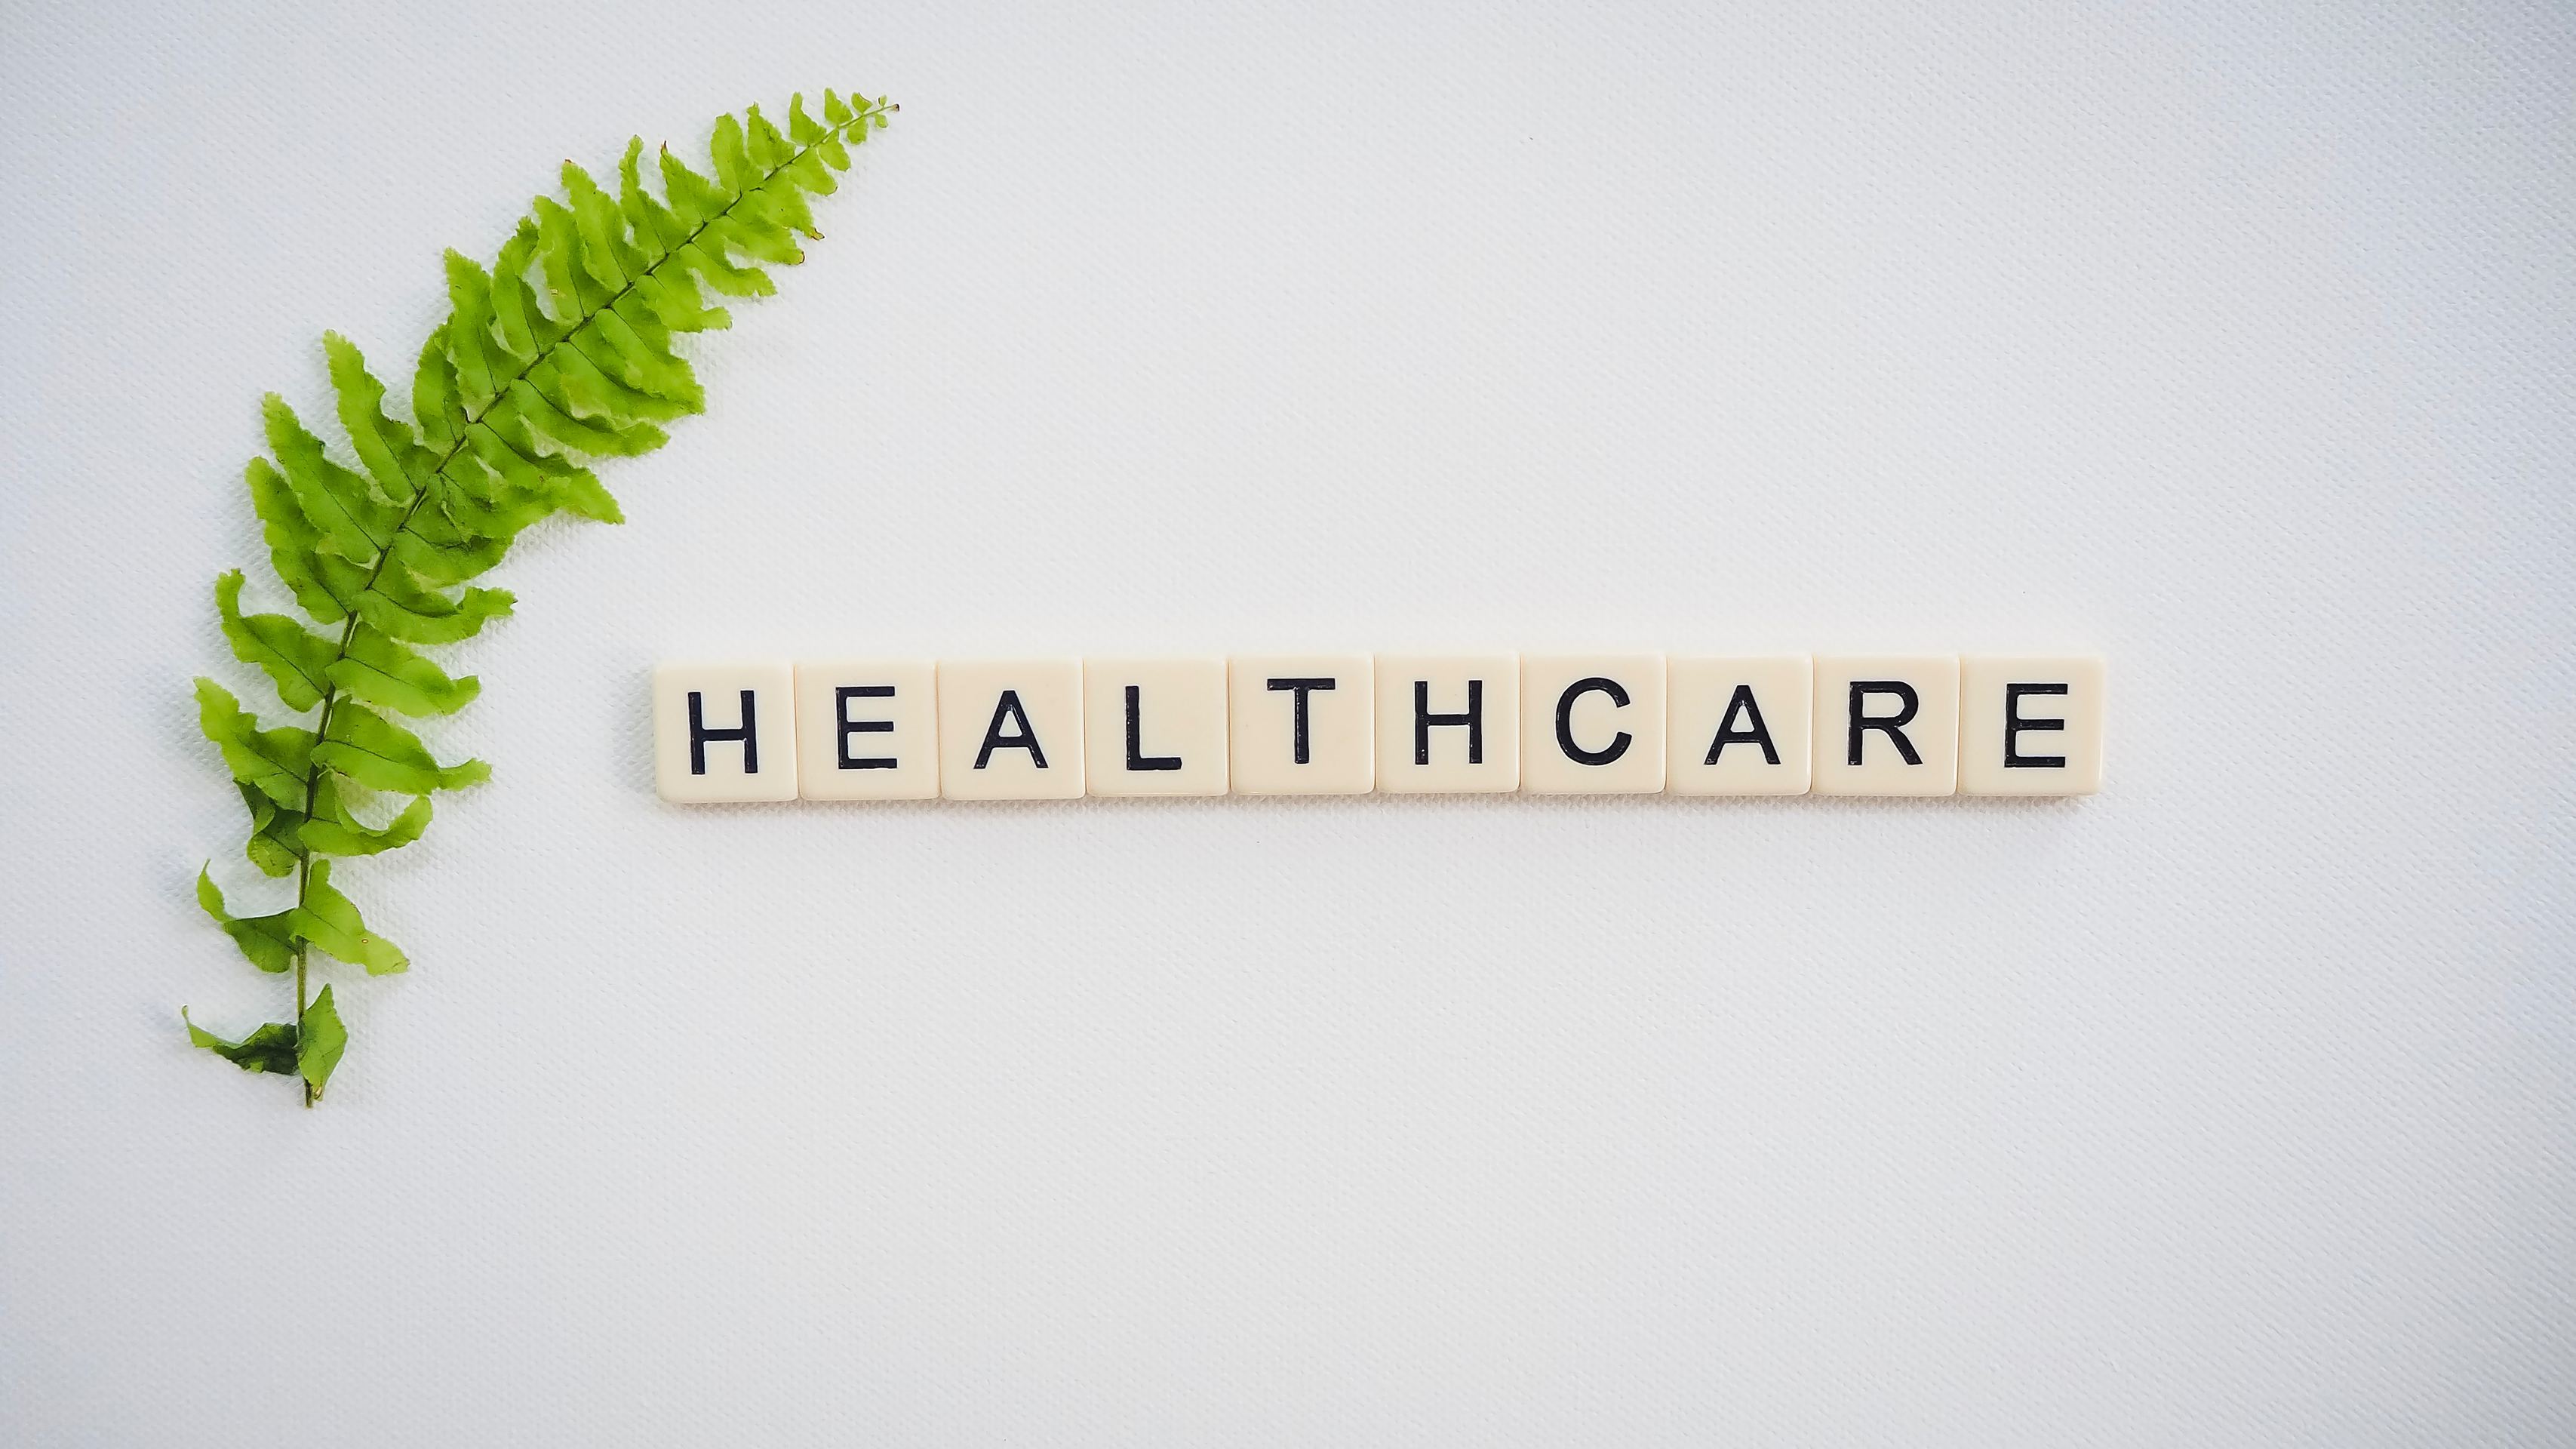 scrabble tiles spelling out the word healthcare next to a fern leaf